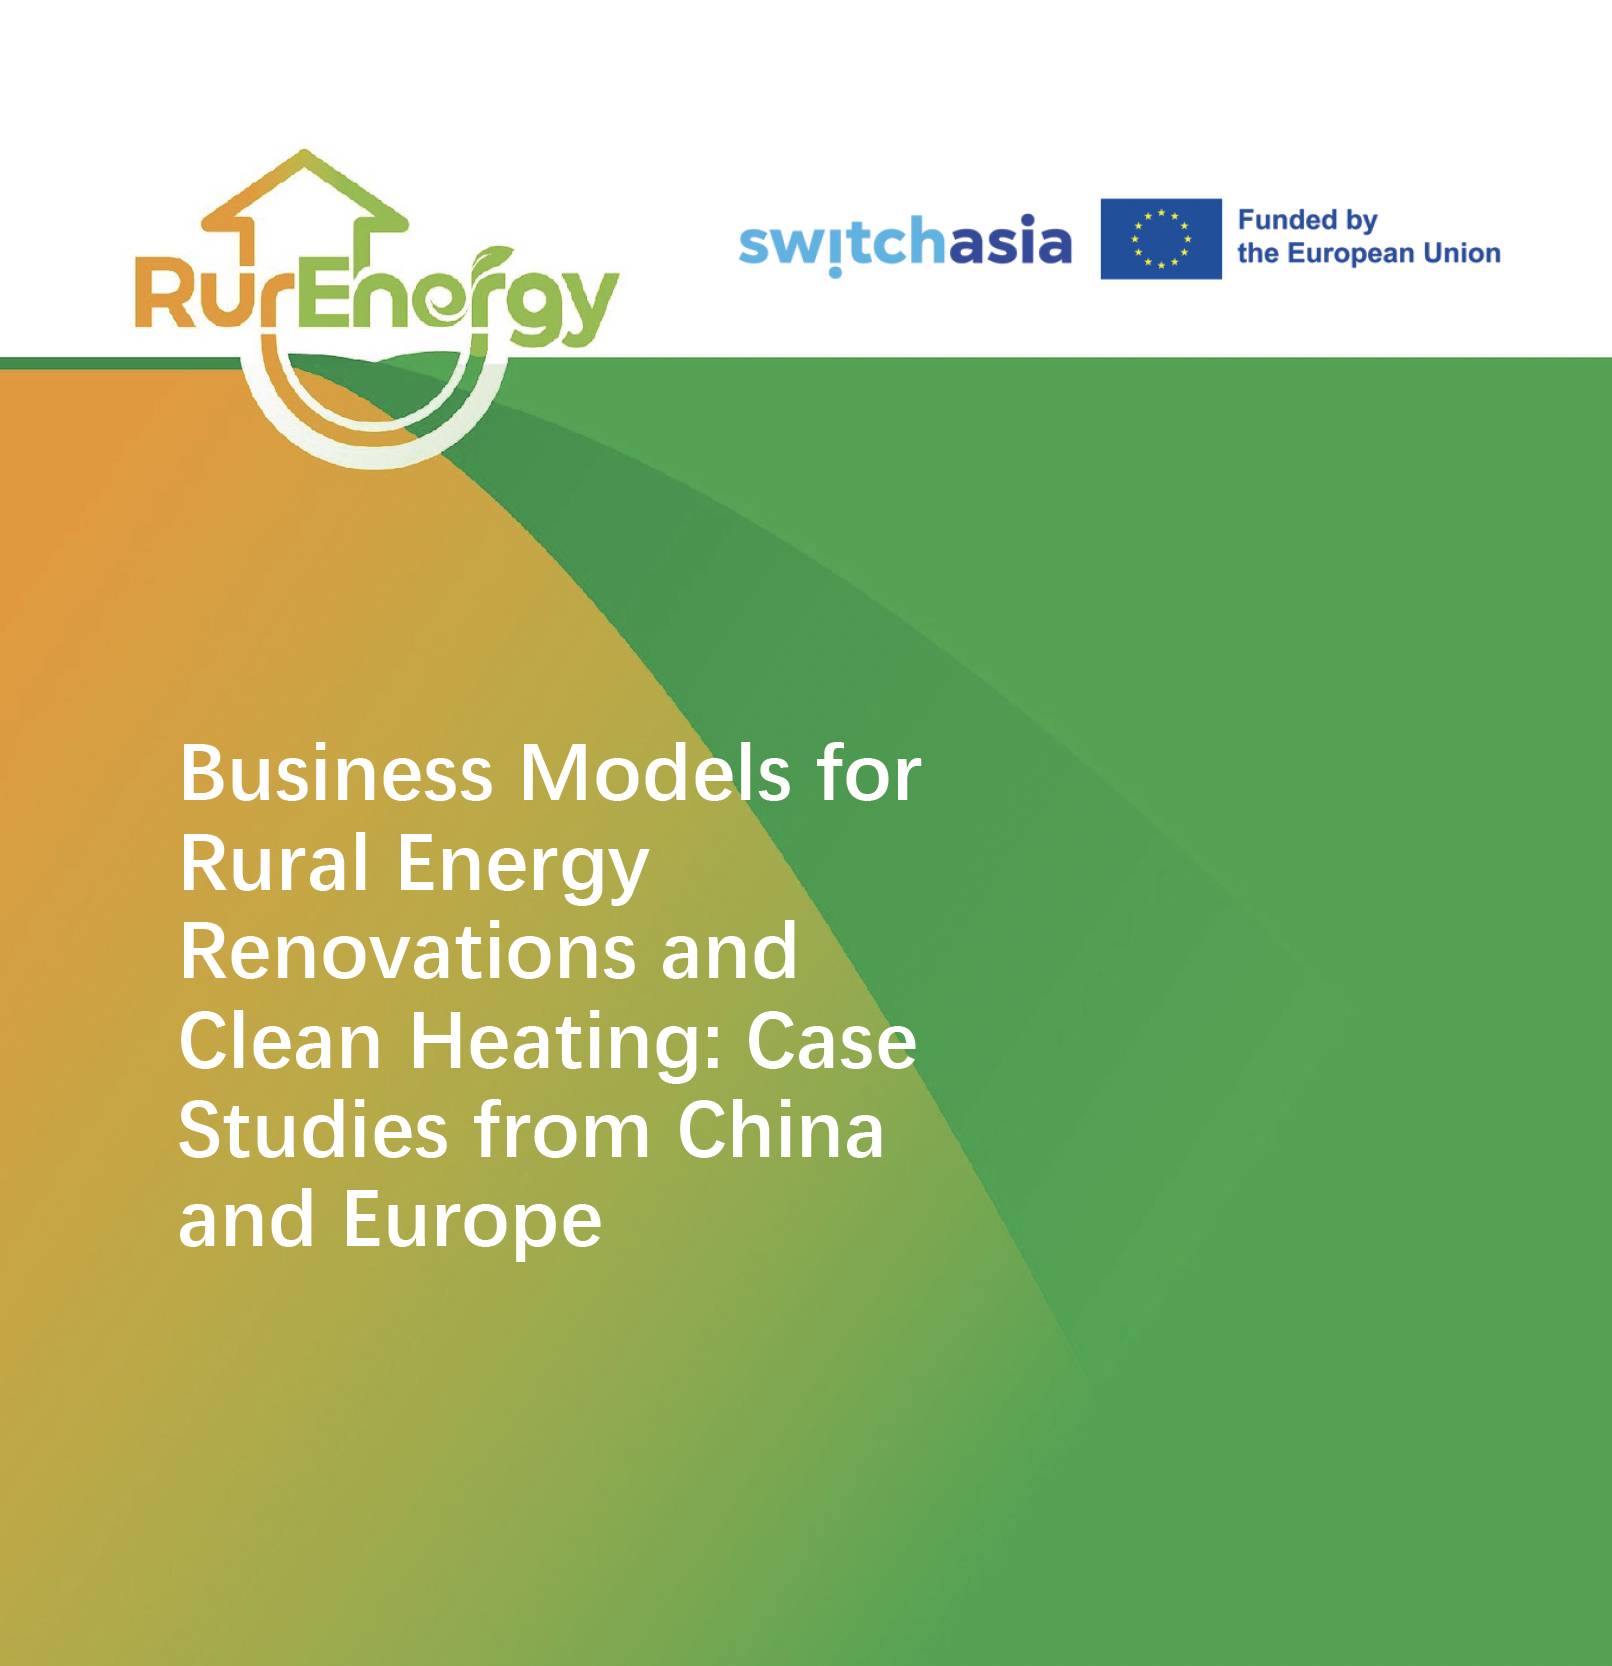 Business Models for Rural Energy Renovations and Clean Heating: Case Studies from China and Europe